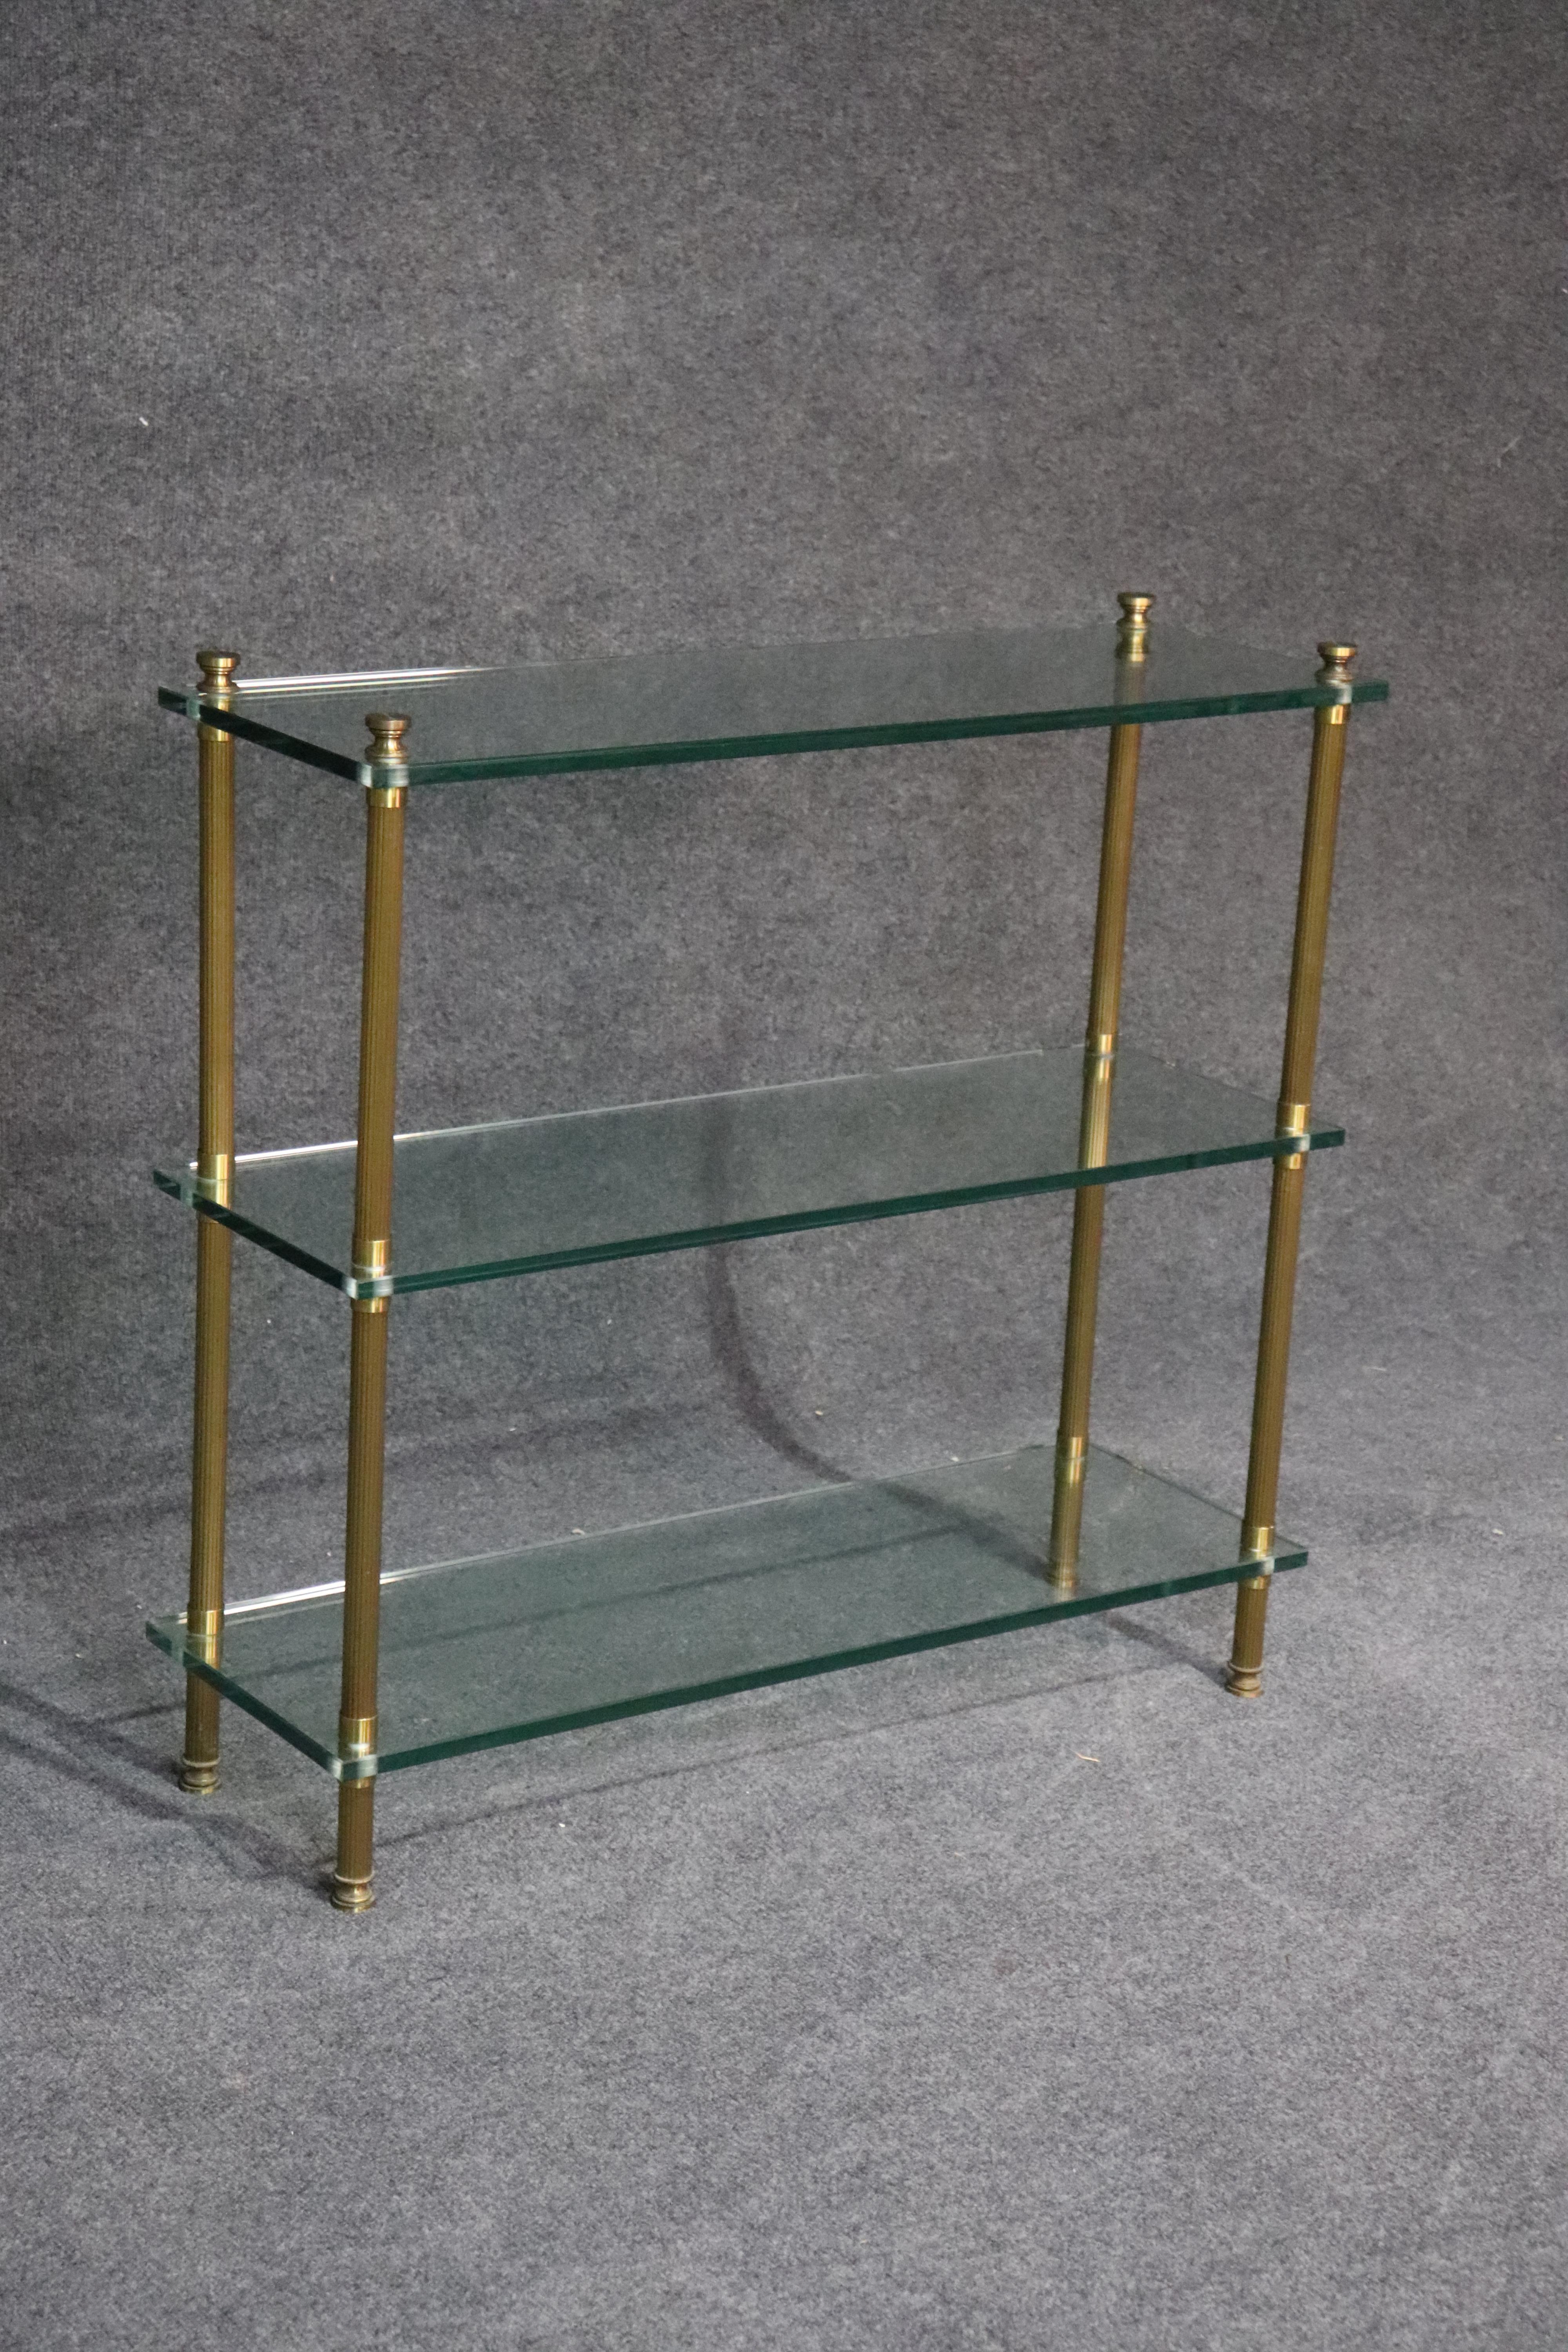 This is a gorgeous fluted brass and extra thick glass three tier console table or etagere, most likely made by Jansen, but unsigned. The quality is superb and the materials are heavy, and beautifully constructed. This can be used in a hallway or